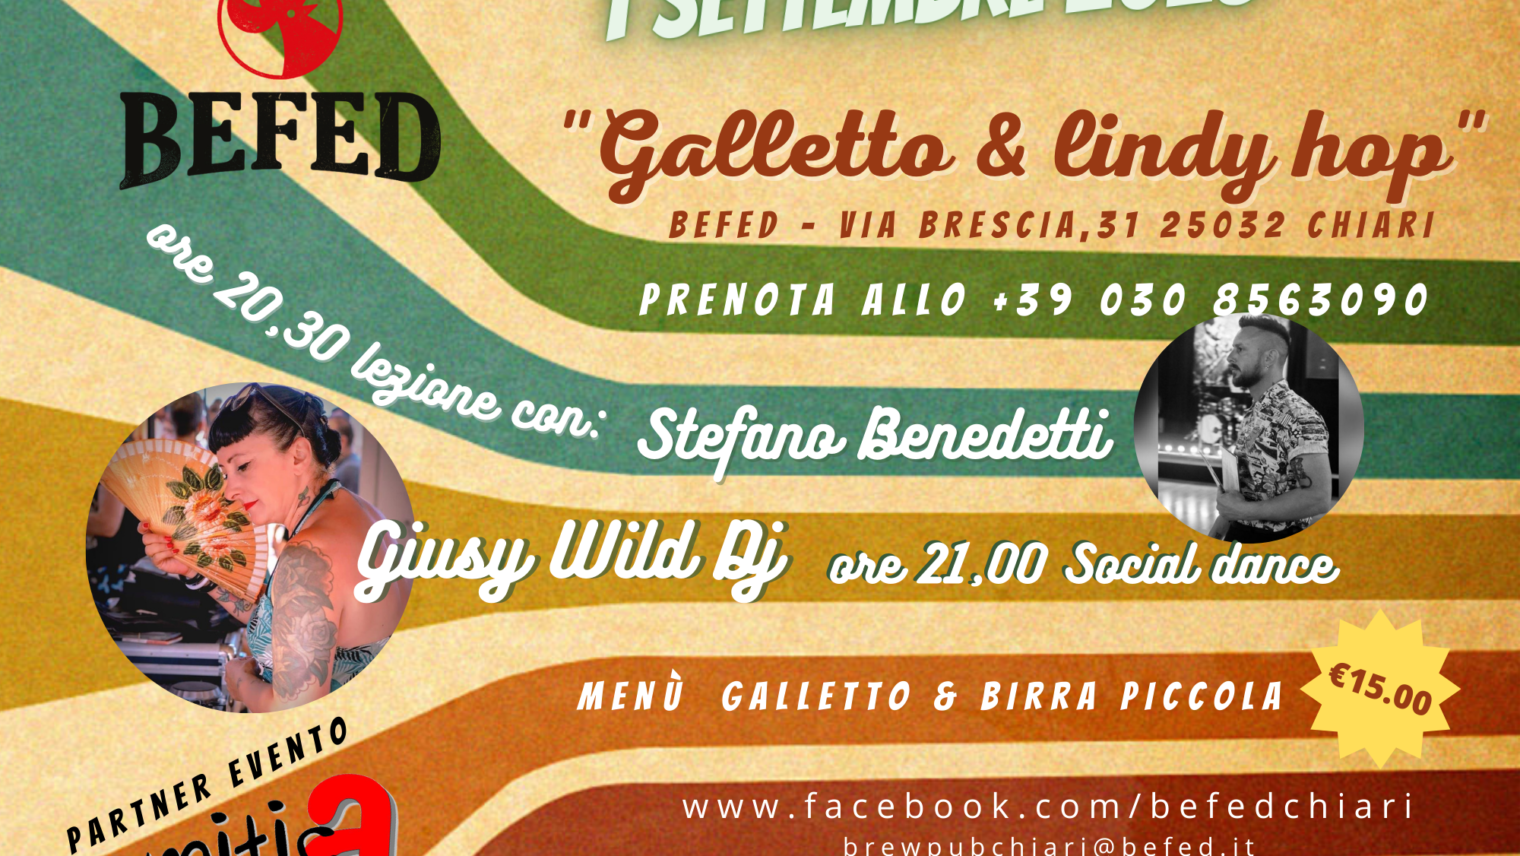 “Galletto & Swing”